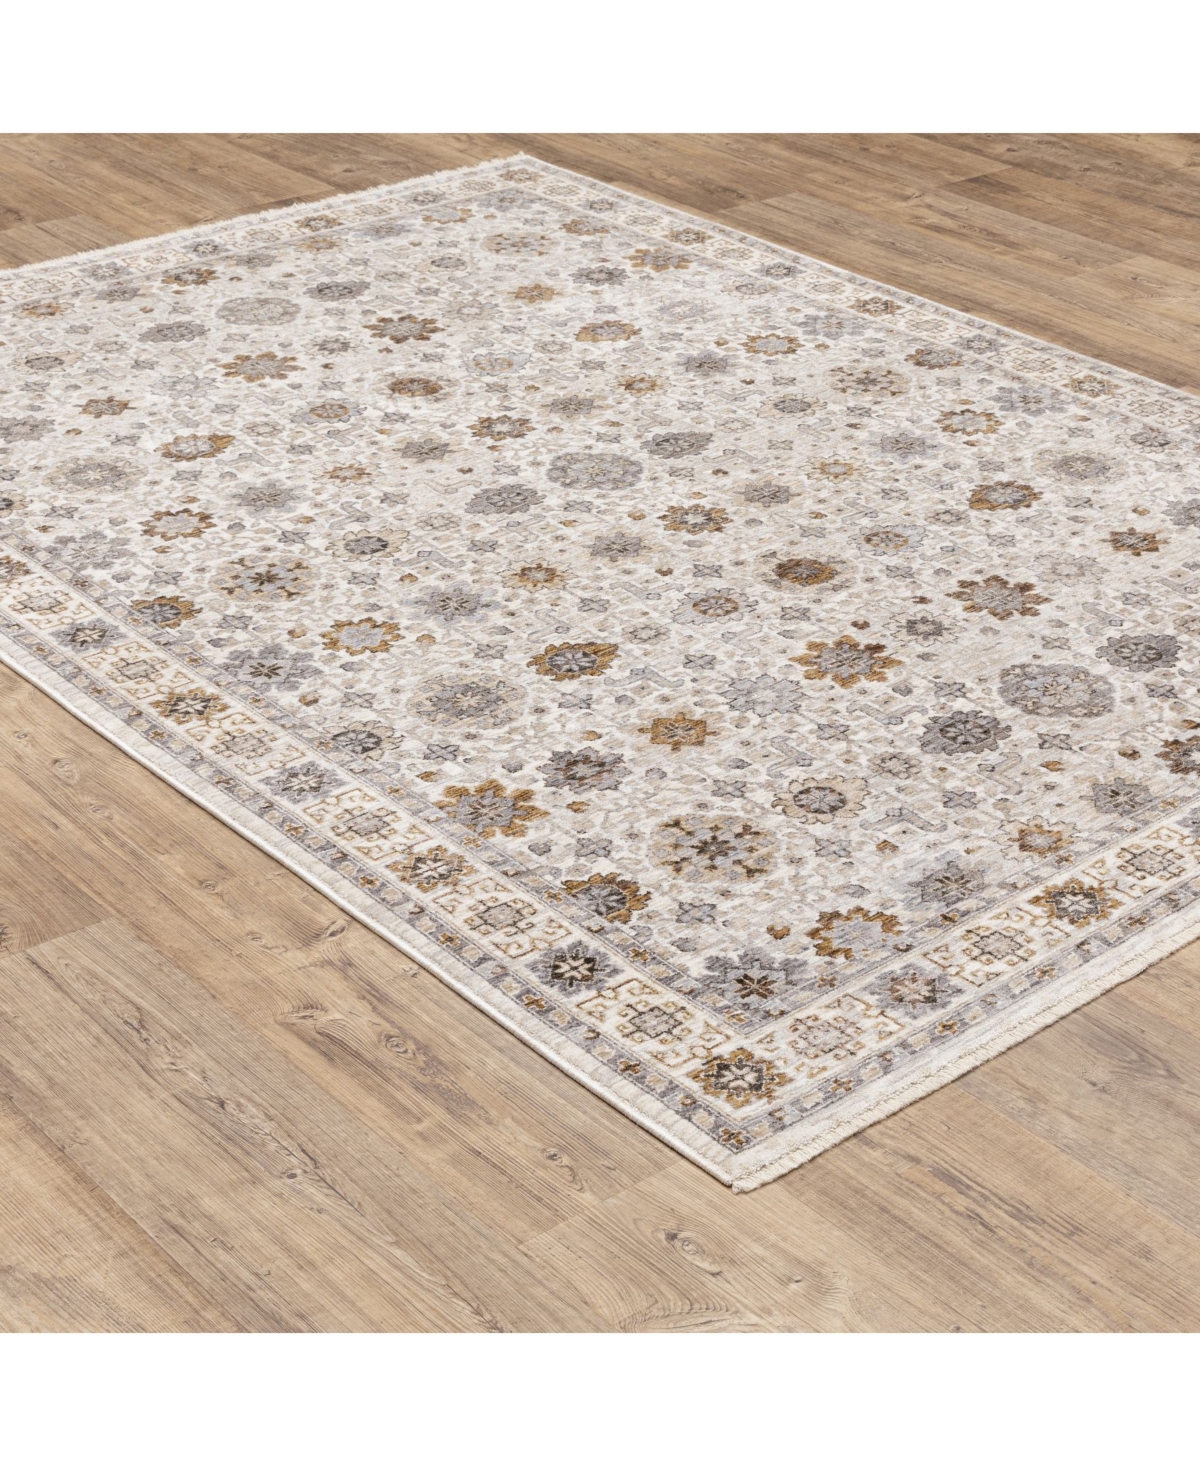 Shop Jhb Design S Kumar Kum04 Ivory And Gold 7'10" X 10'10" Area Rug In Ivory,gold